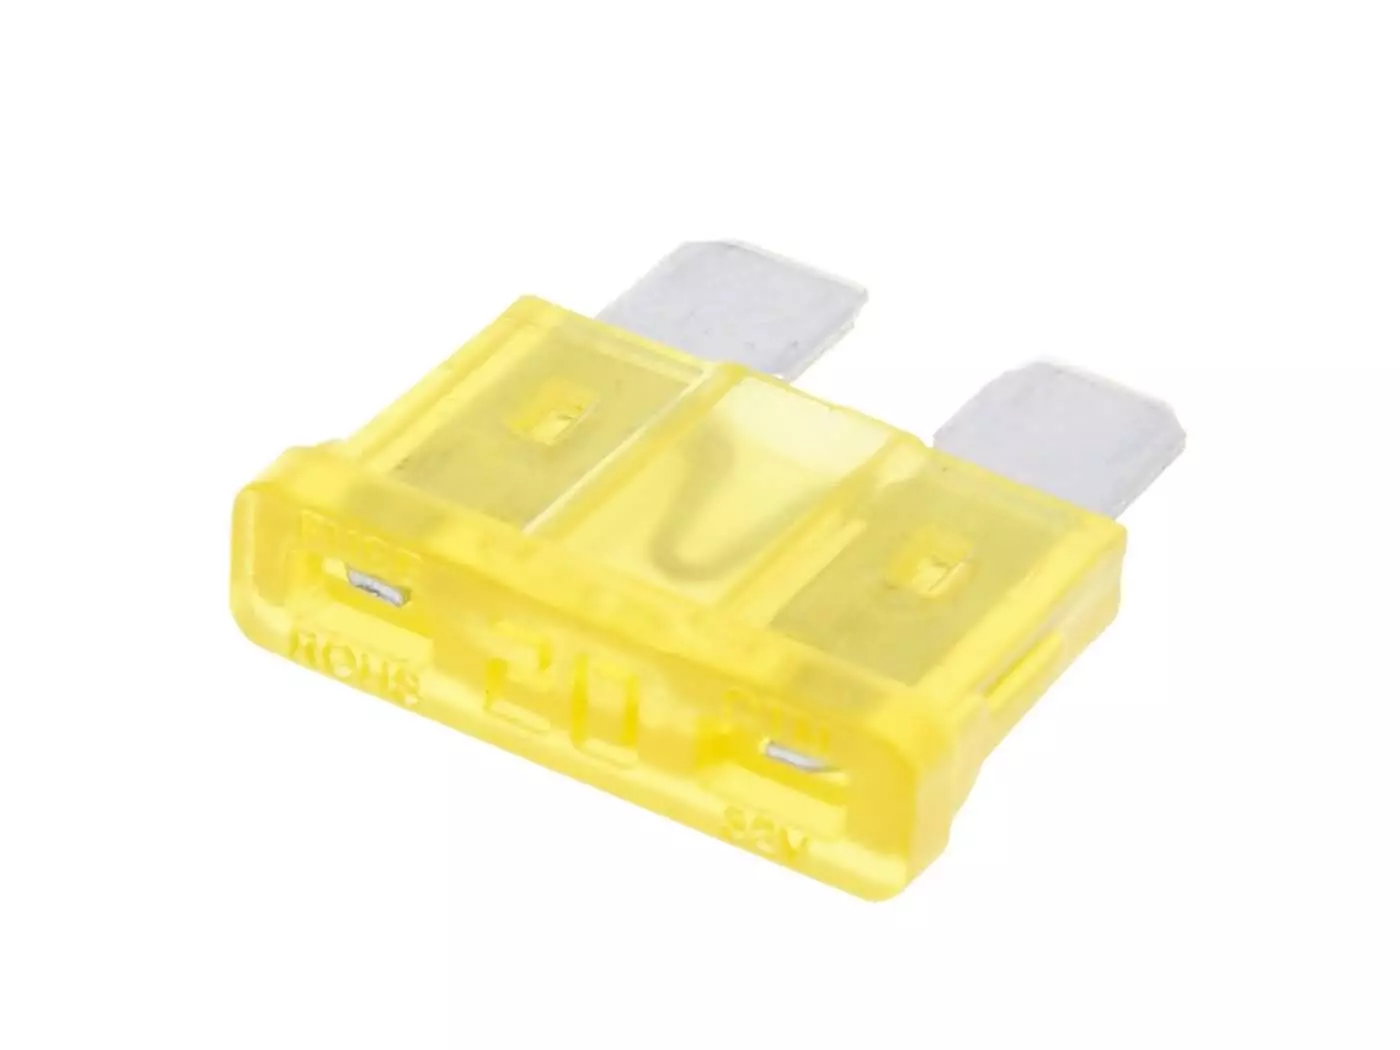 Blade Fuse Flat 19.2mm 20A Yellow In Color